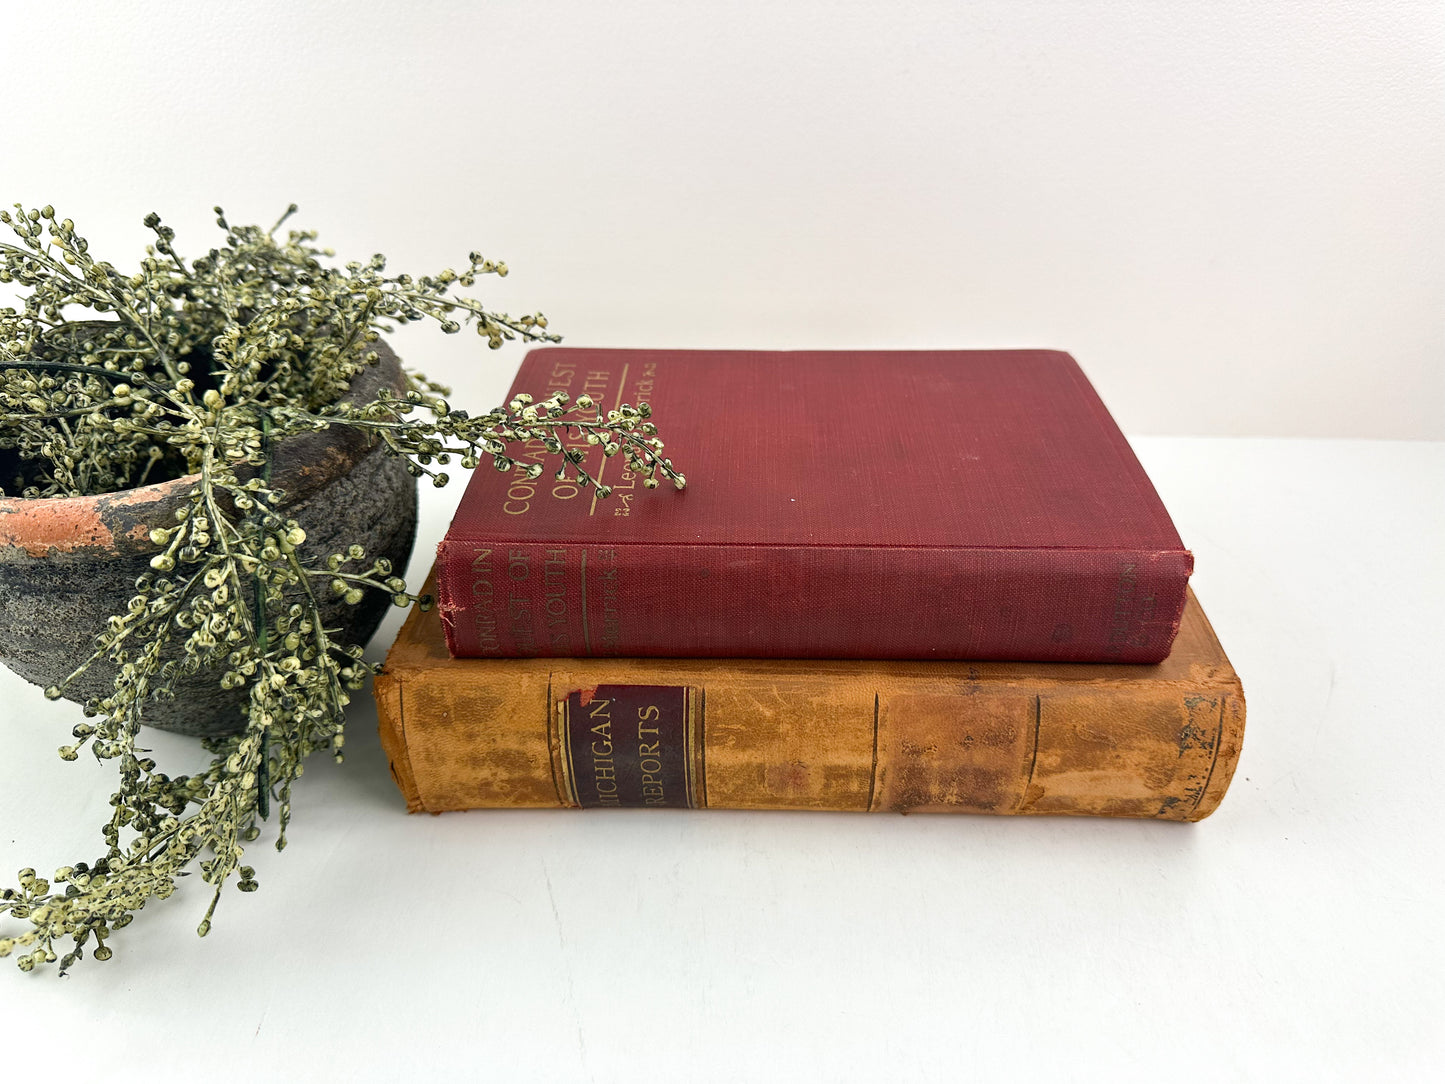 Red and Brown Rustic Book Set